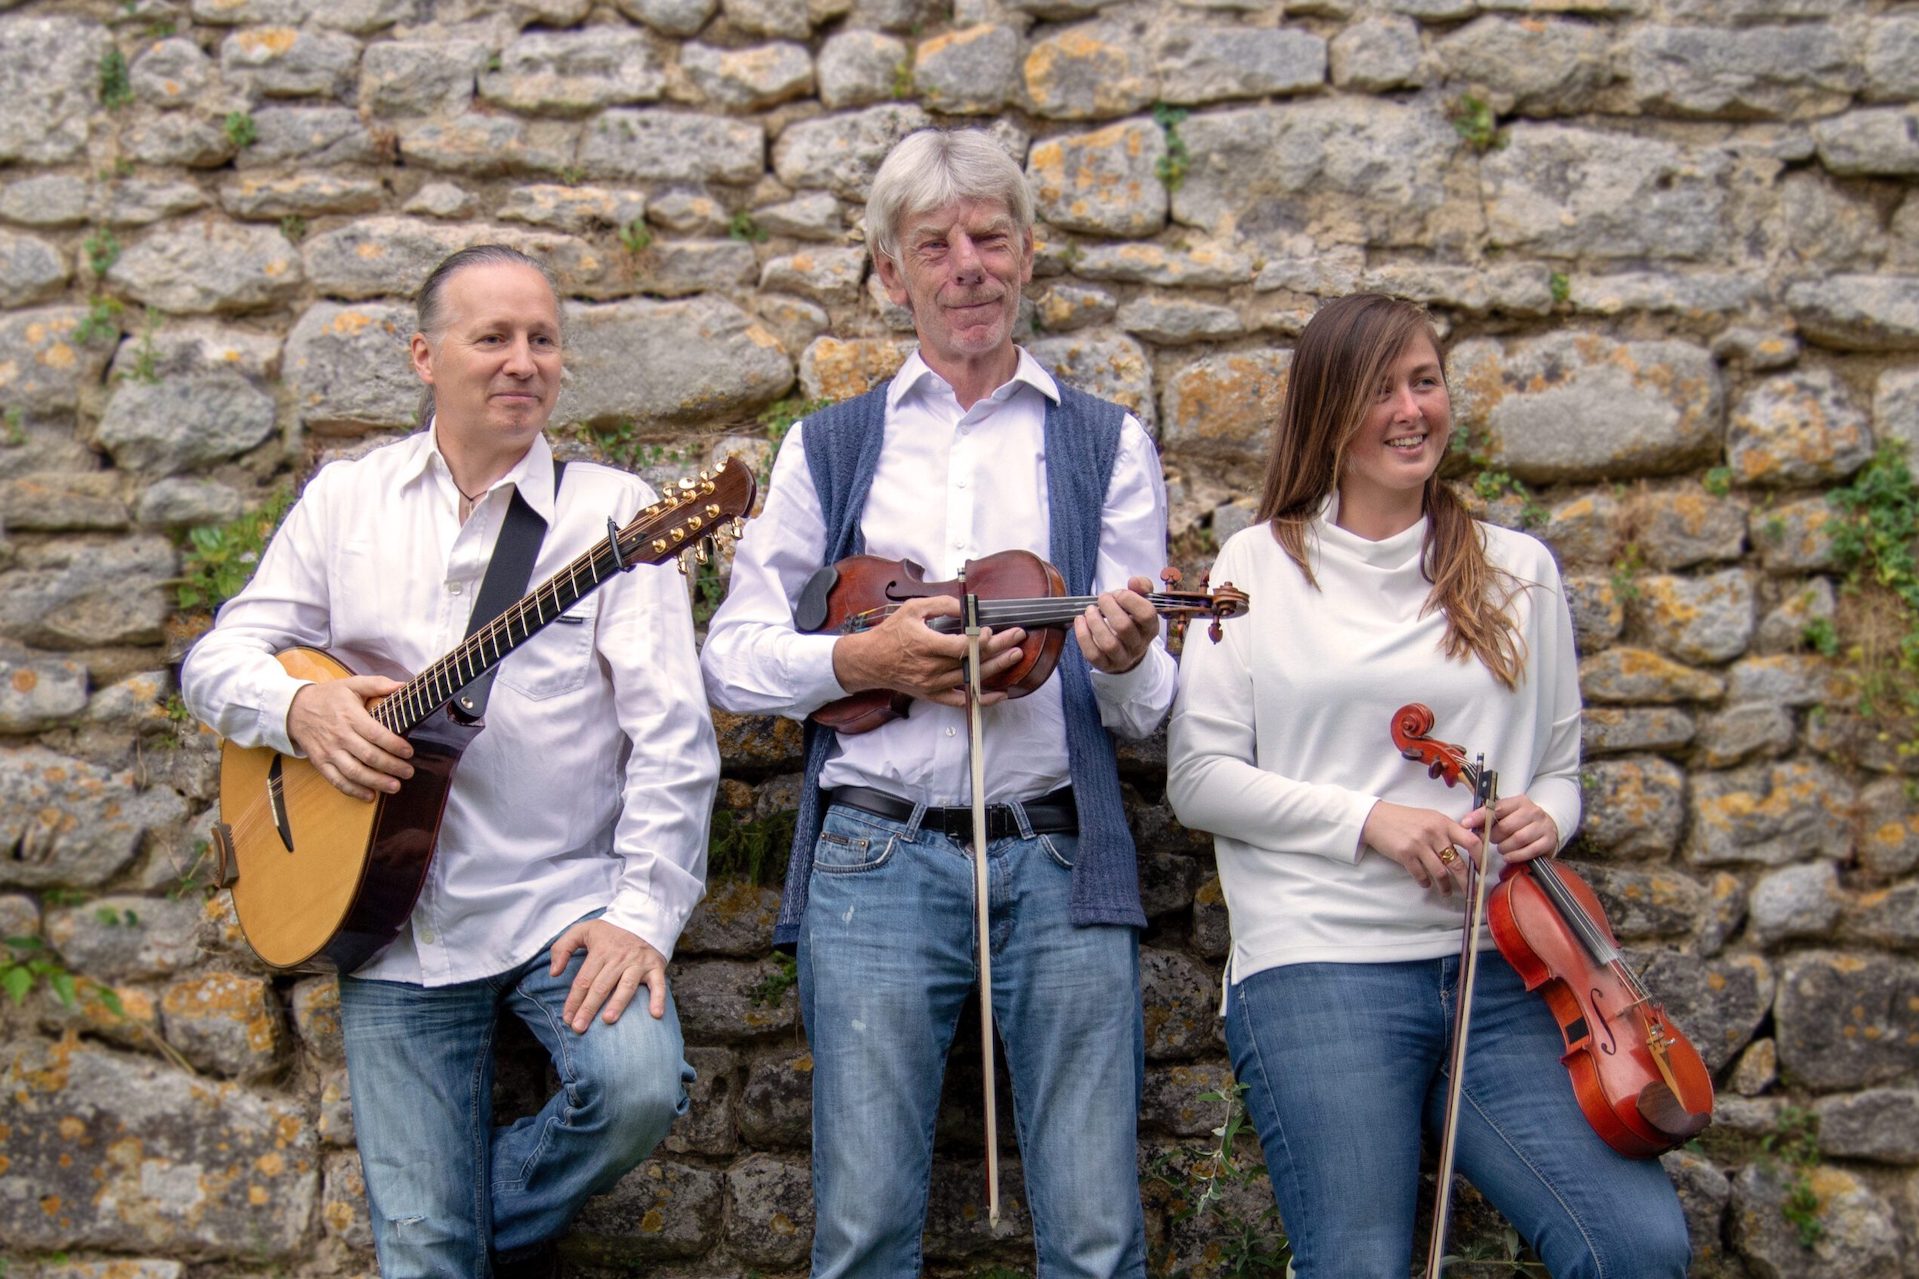 3 people smiling, leaning against an old stone wall holding musical instruments, dressed in white shirts and jeans.